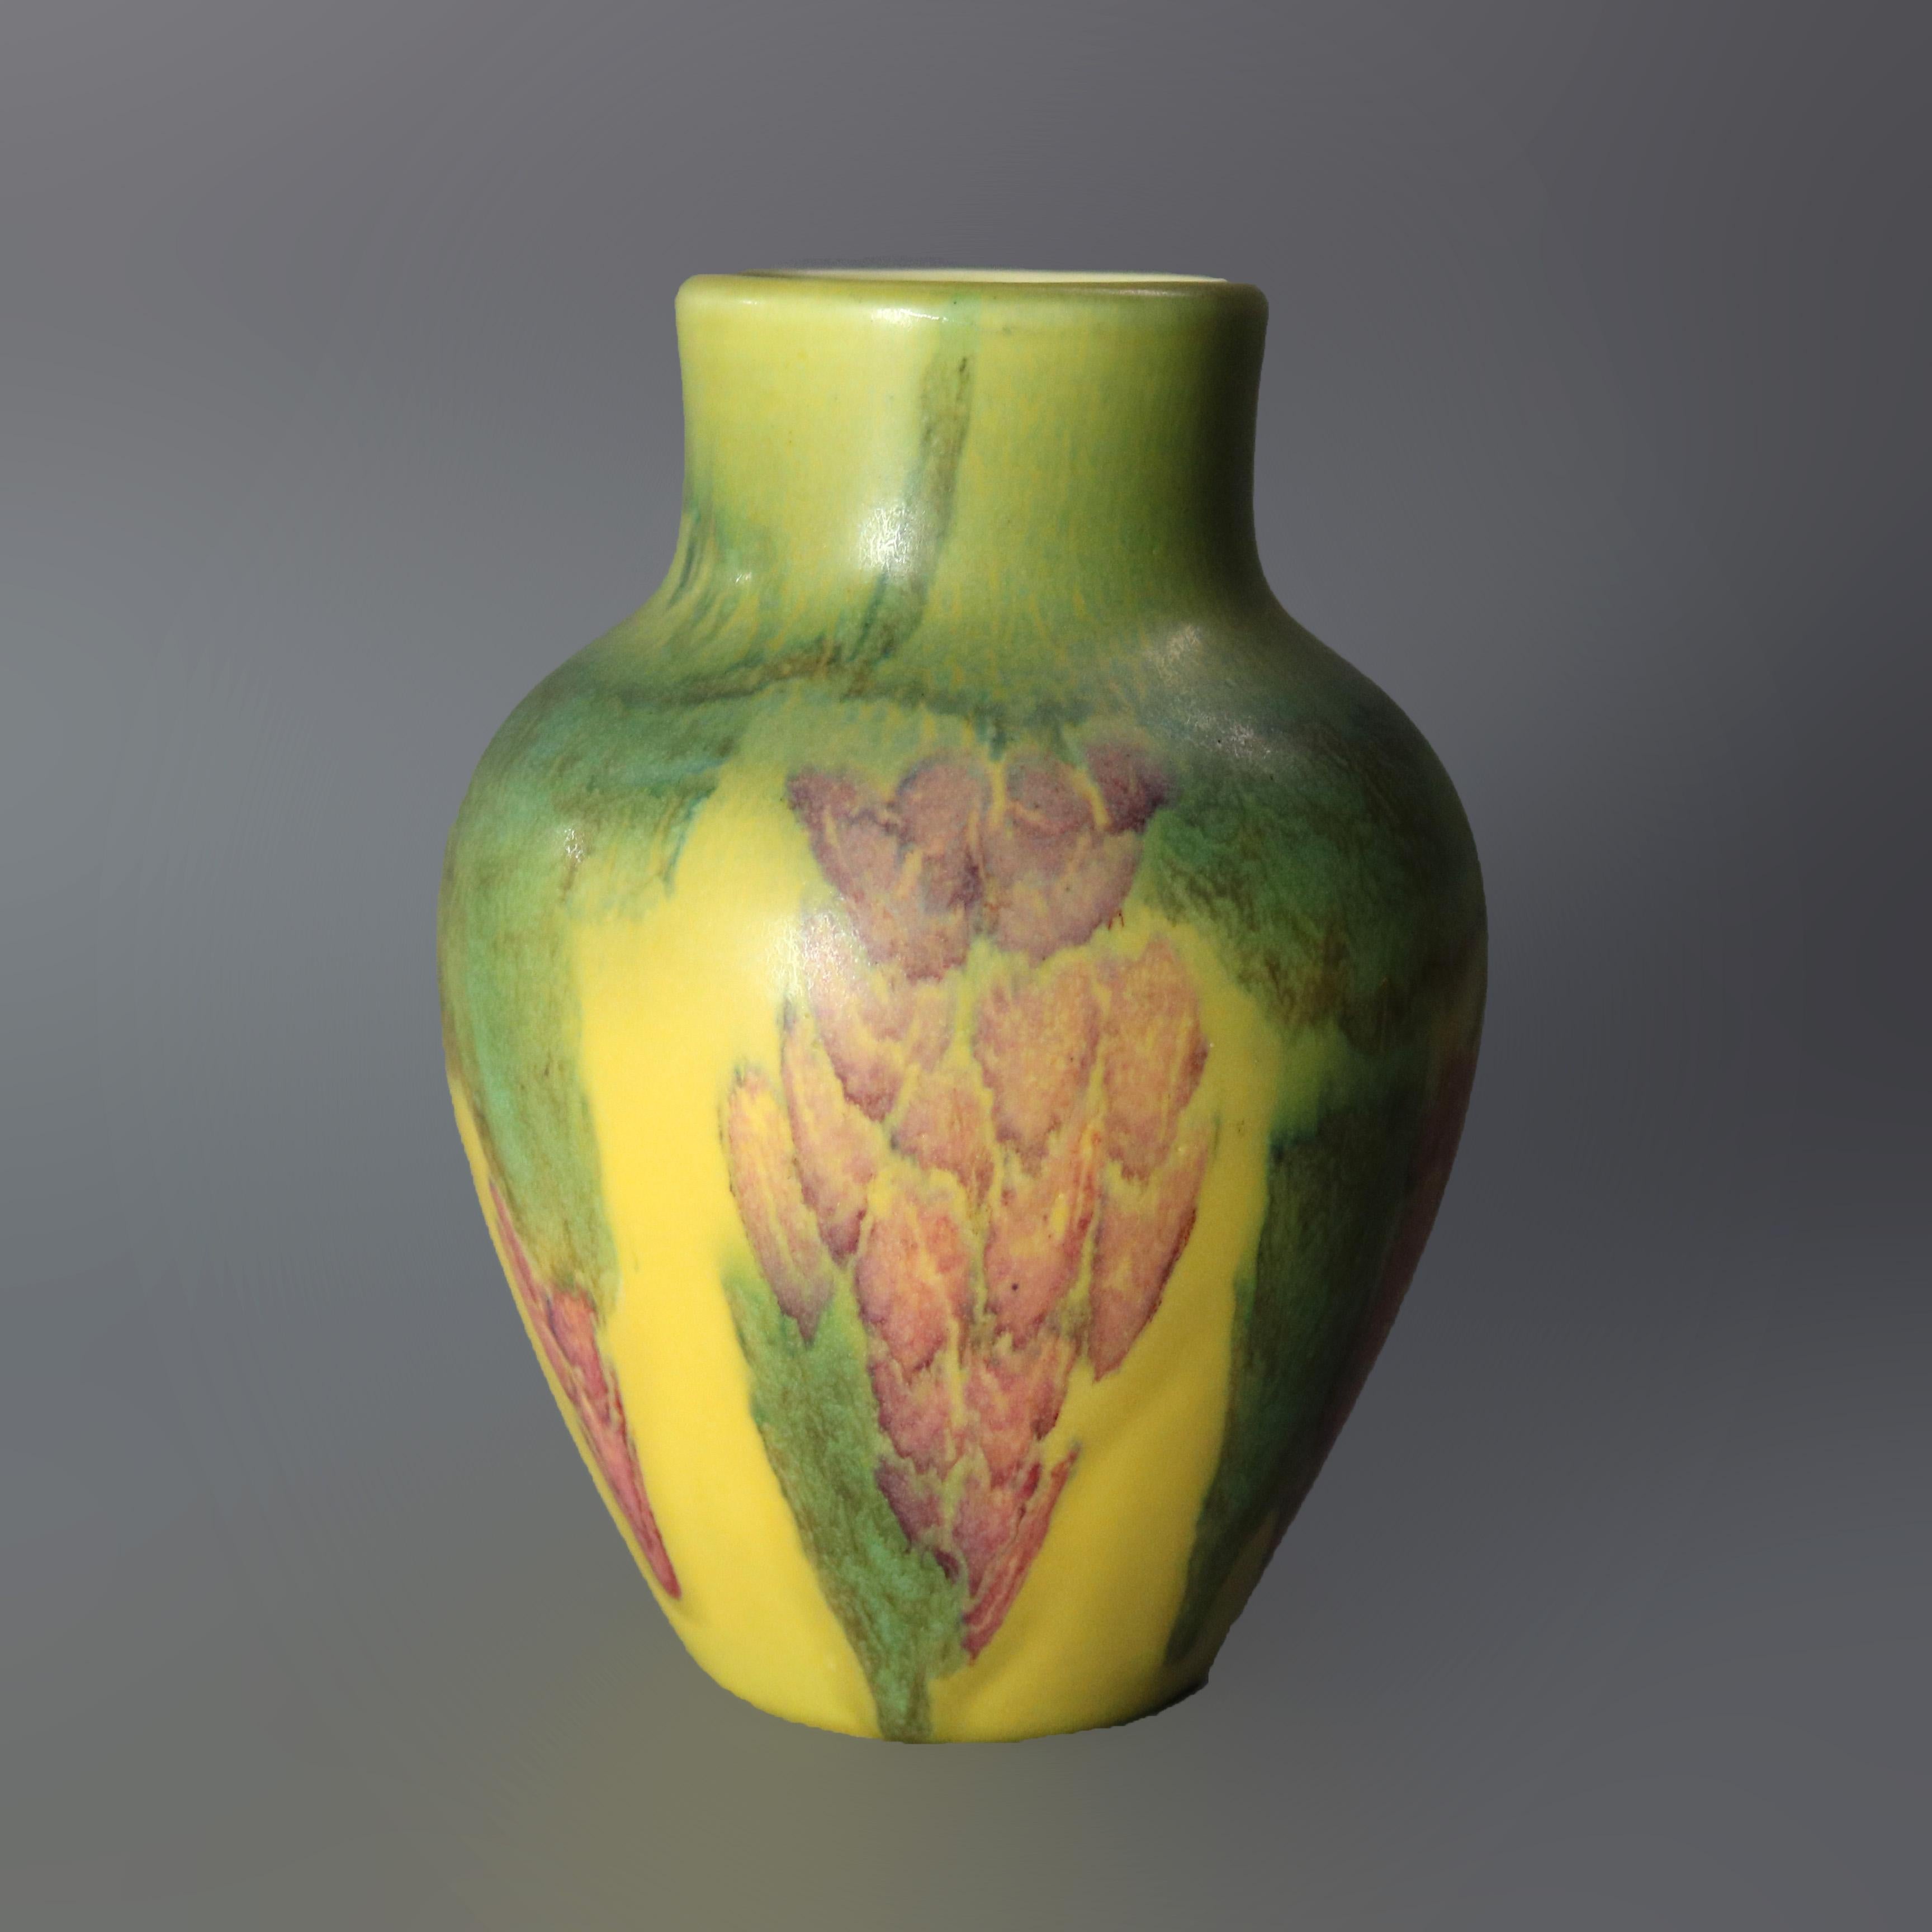 An antique Arts and Crafts vase by Rookwood offers art pottery construction with hand painted abstract floral or grape and leaf design, marked on base as photographed, 1928

Measures: 7.5